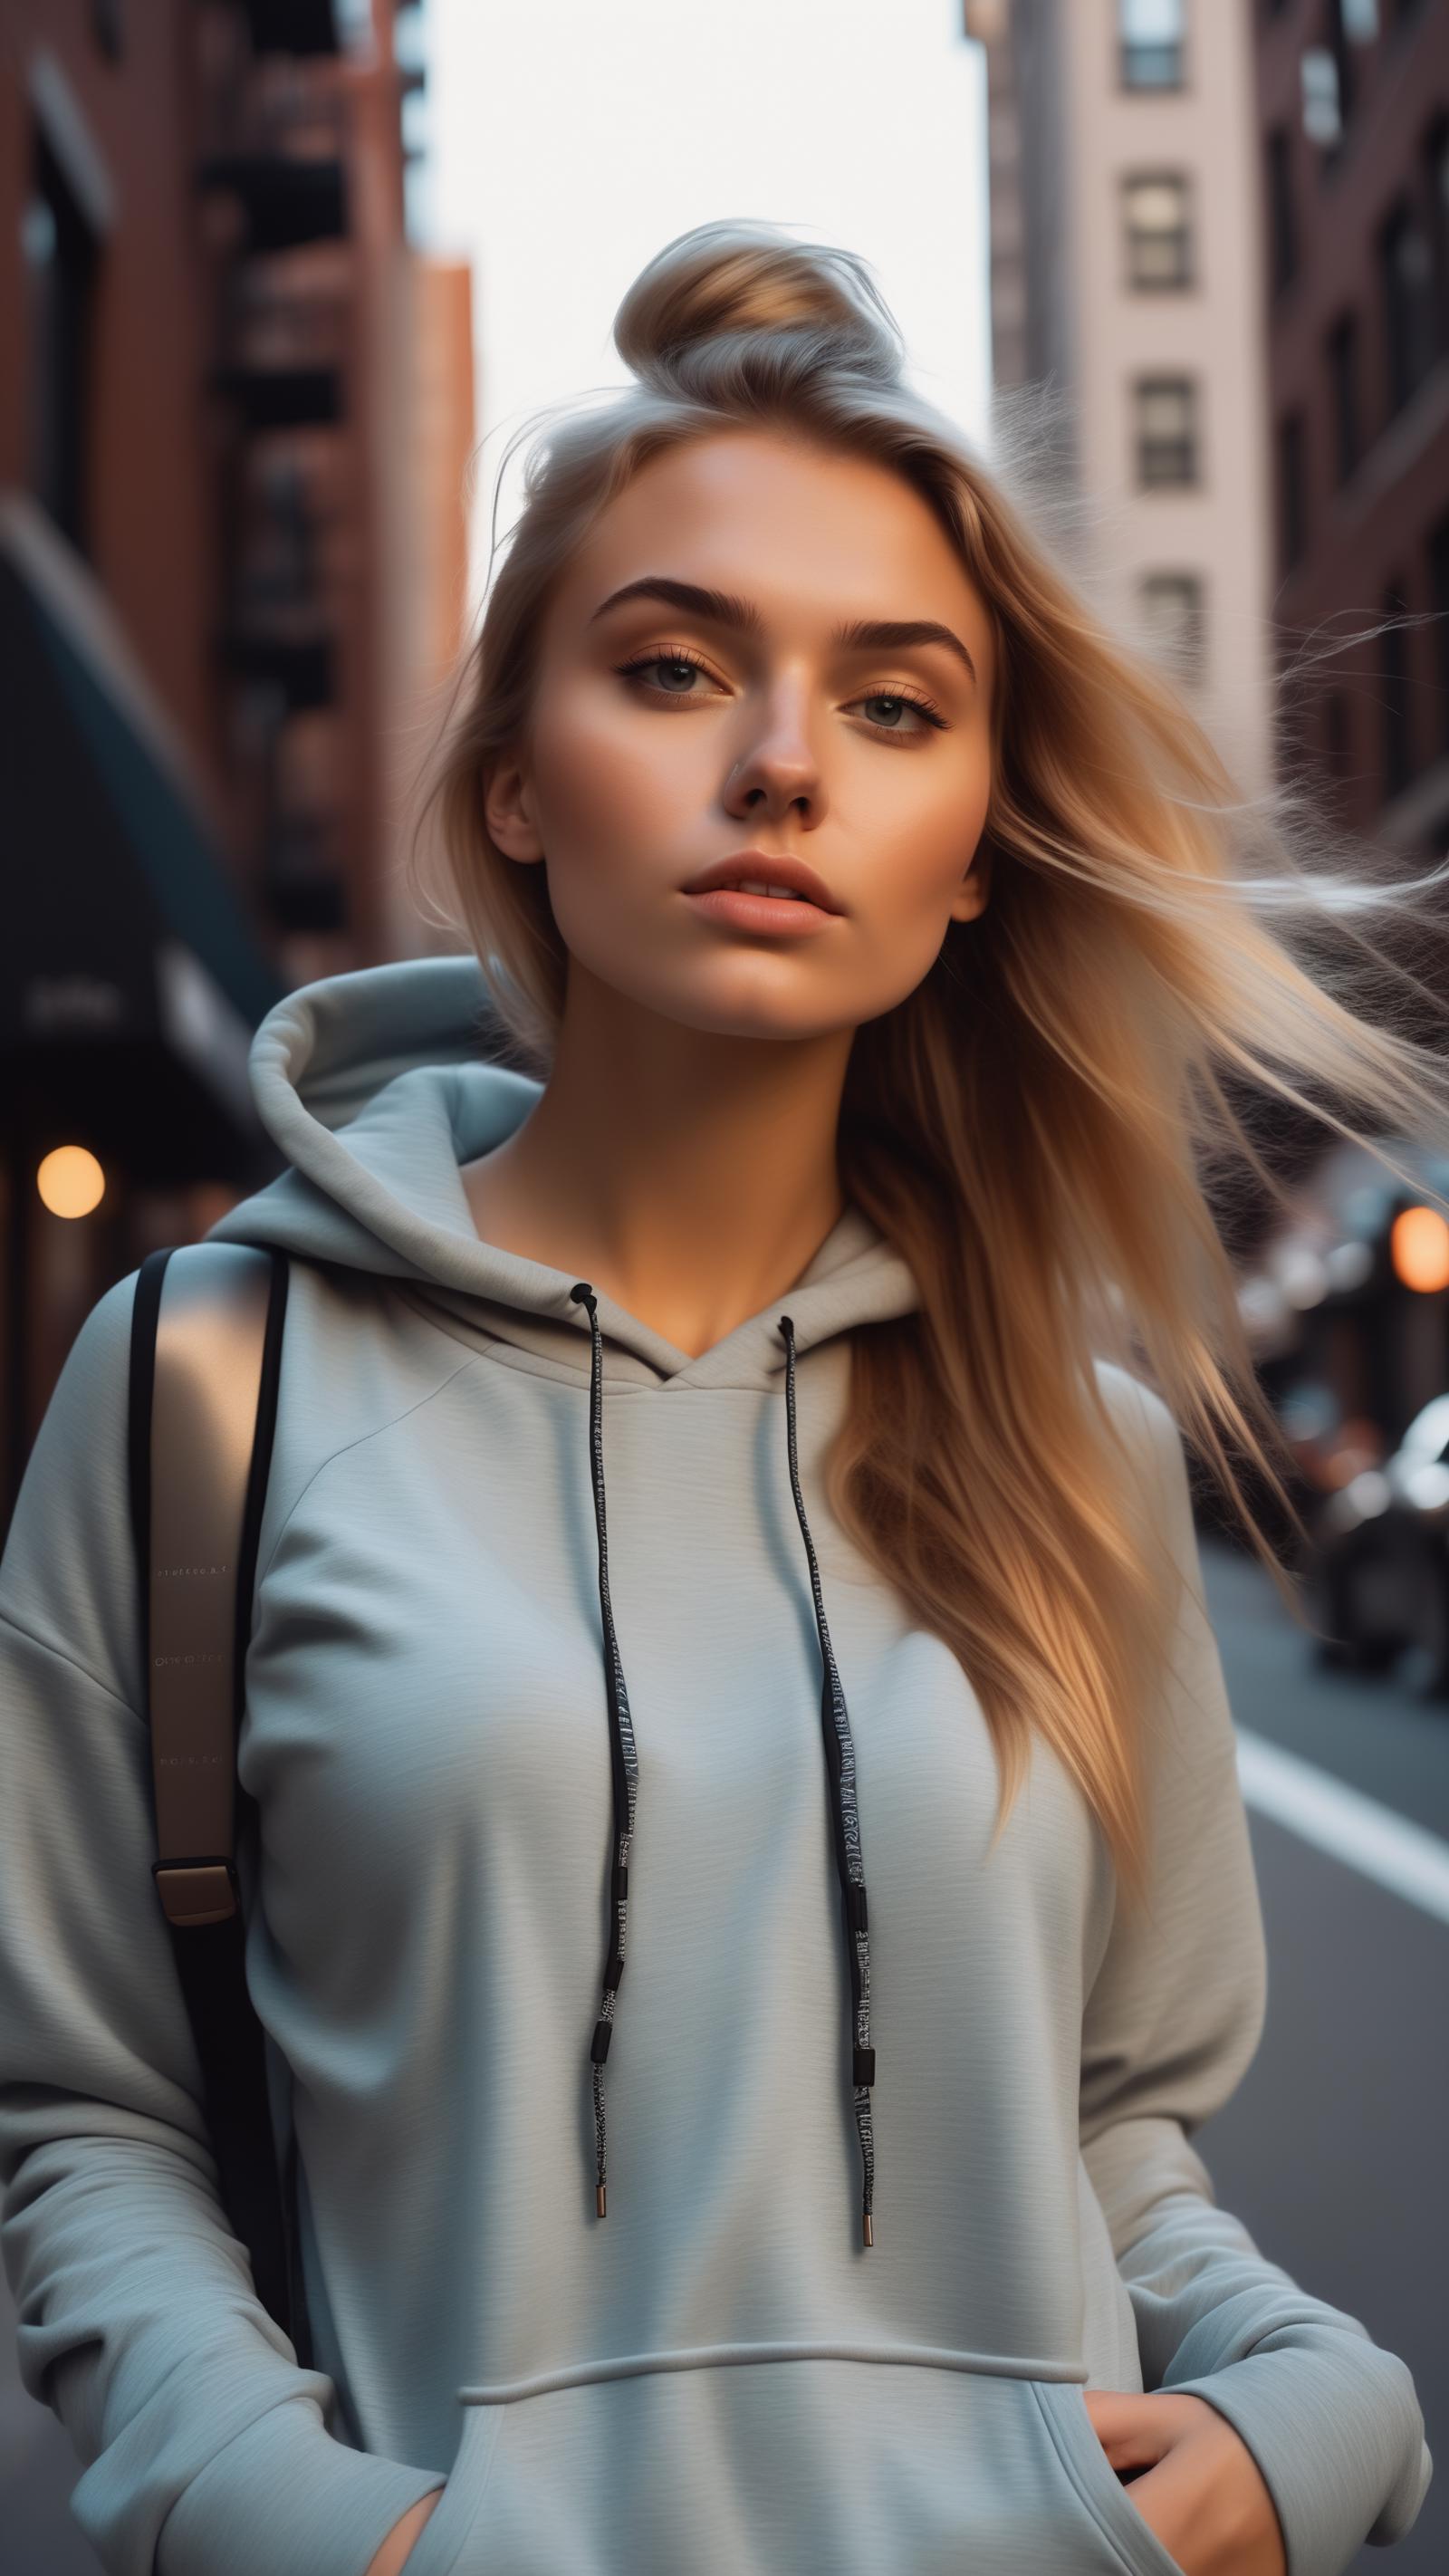 A young blonde woman wearing a hooded sweatshirt and holding a purse.